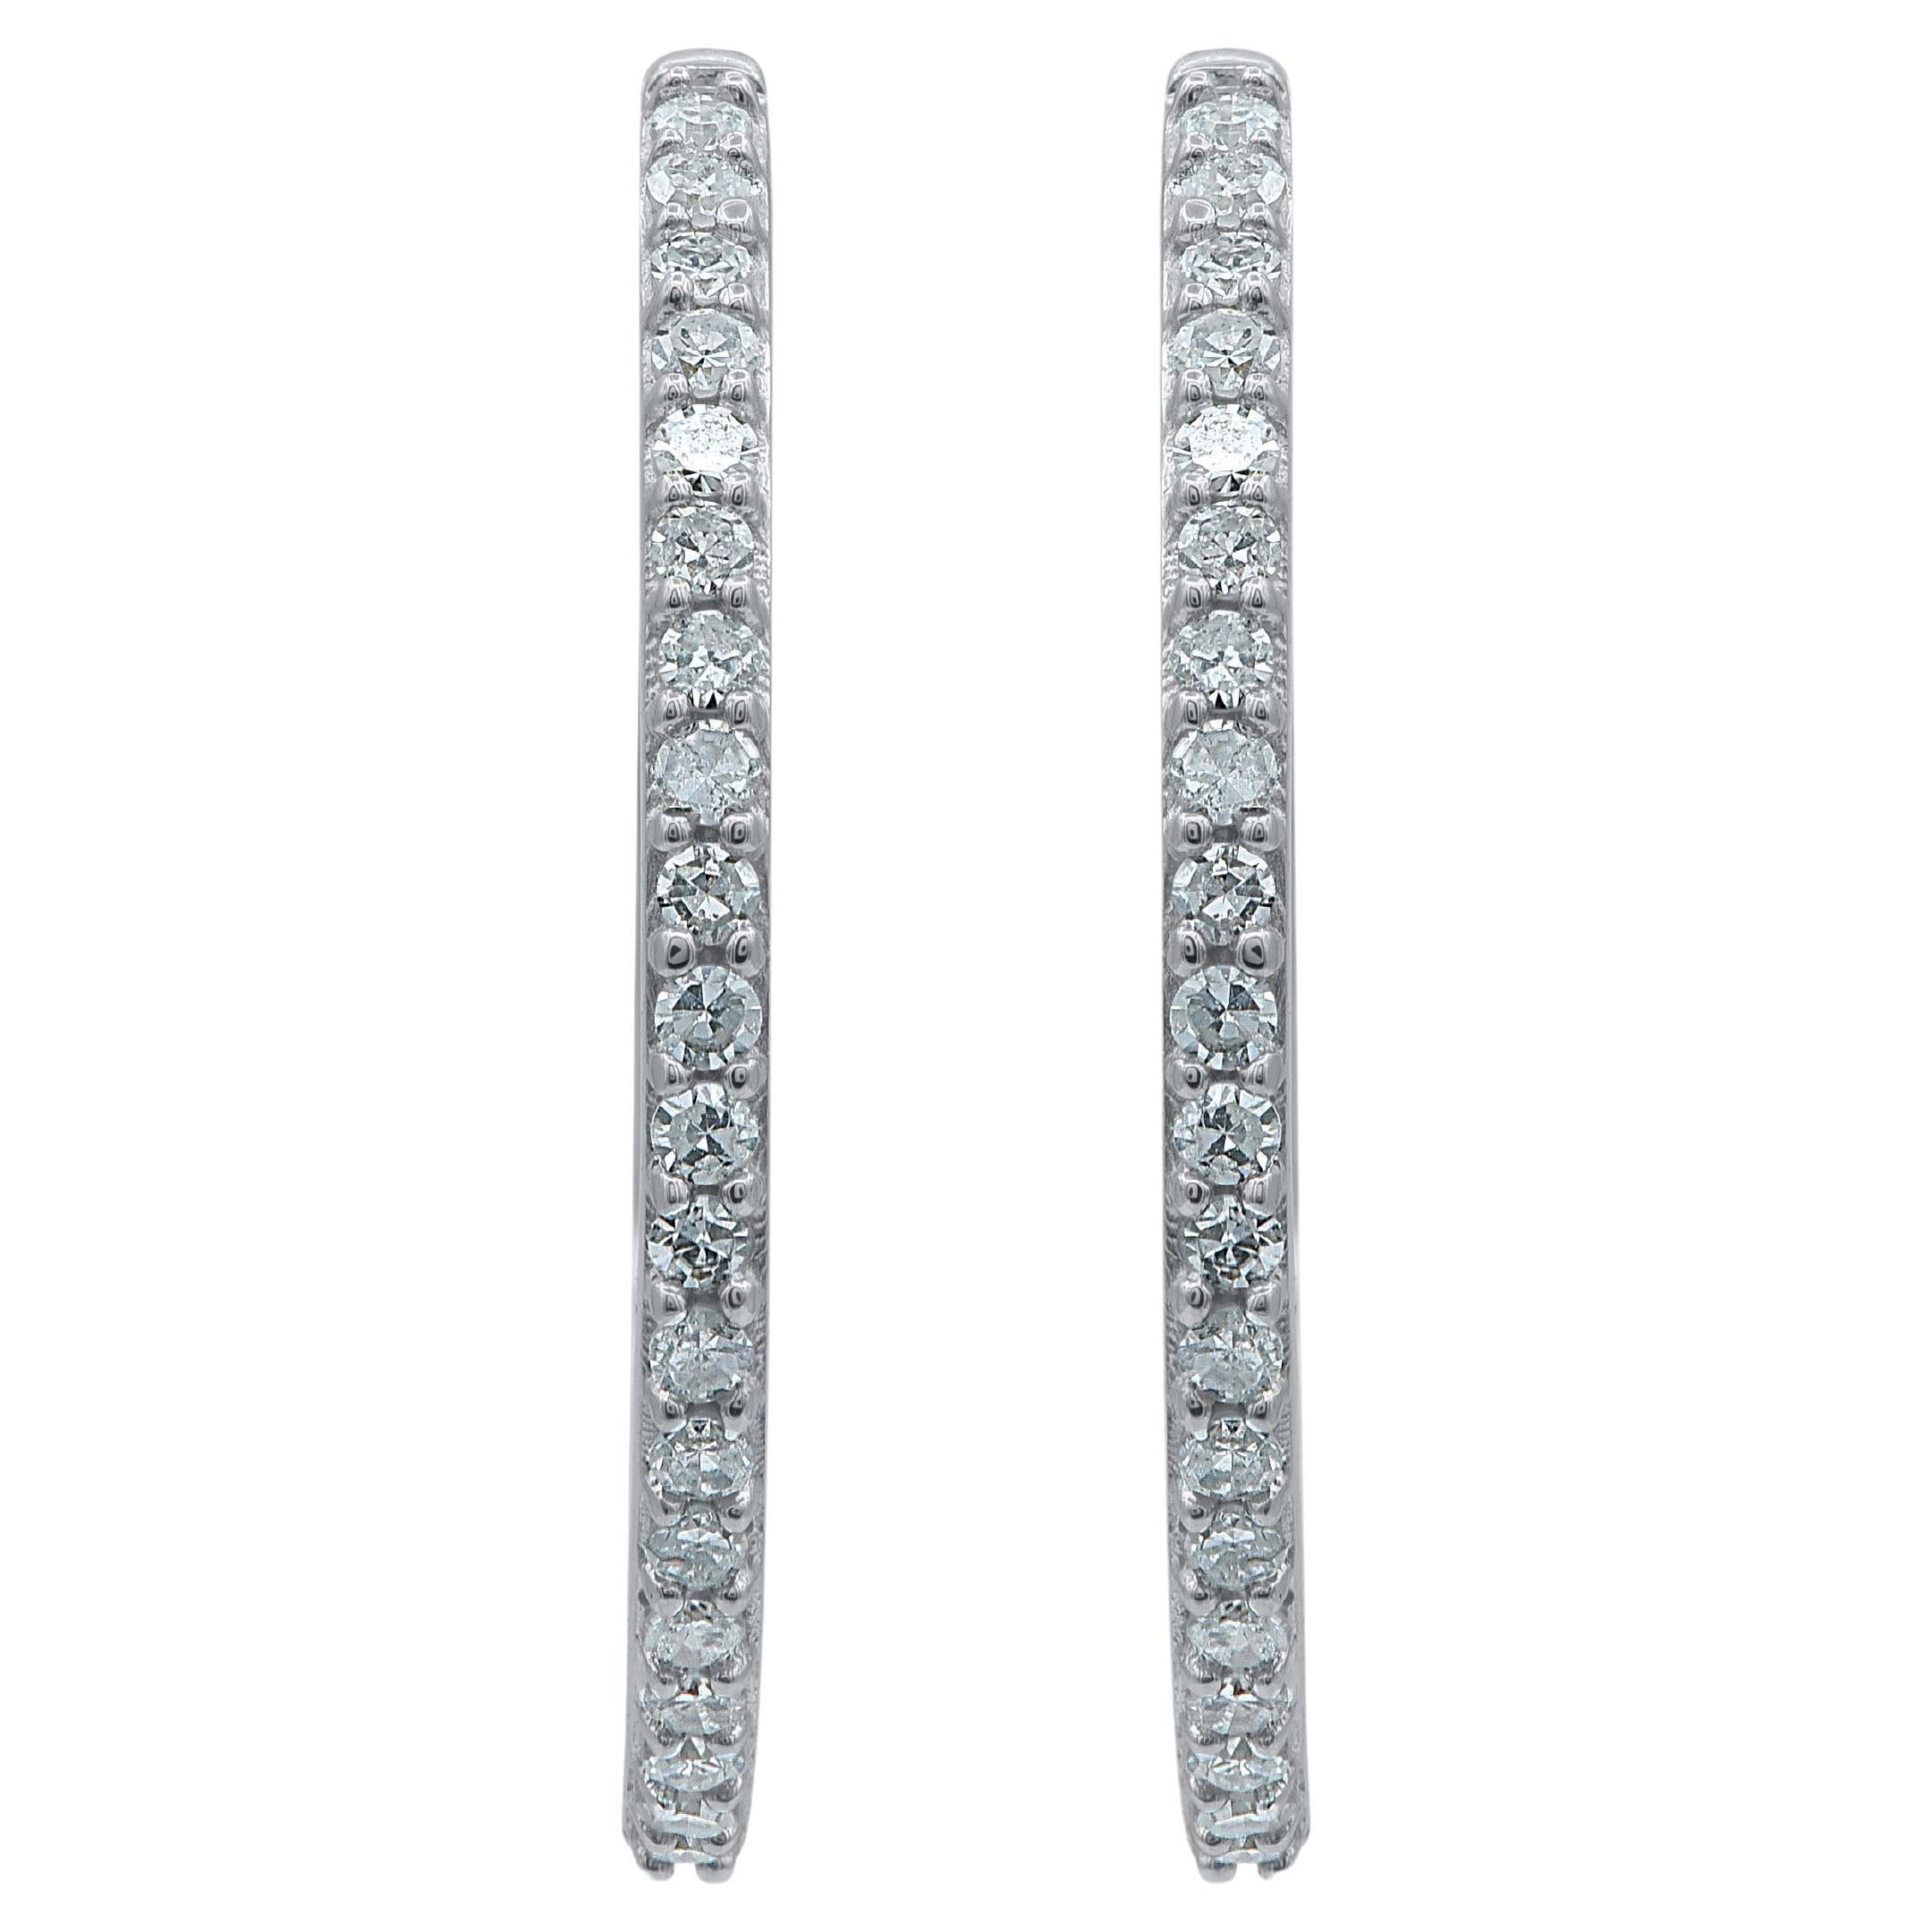 Bring charm to your look with this diamond hoop earrings. This earring is beautifully designed and studded with 40 single cut round diamond set in prong setting. We only use natural, 100% conflict free diamonds which shines in H-I Color and I-2